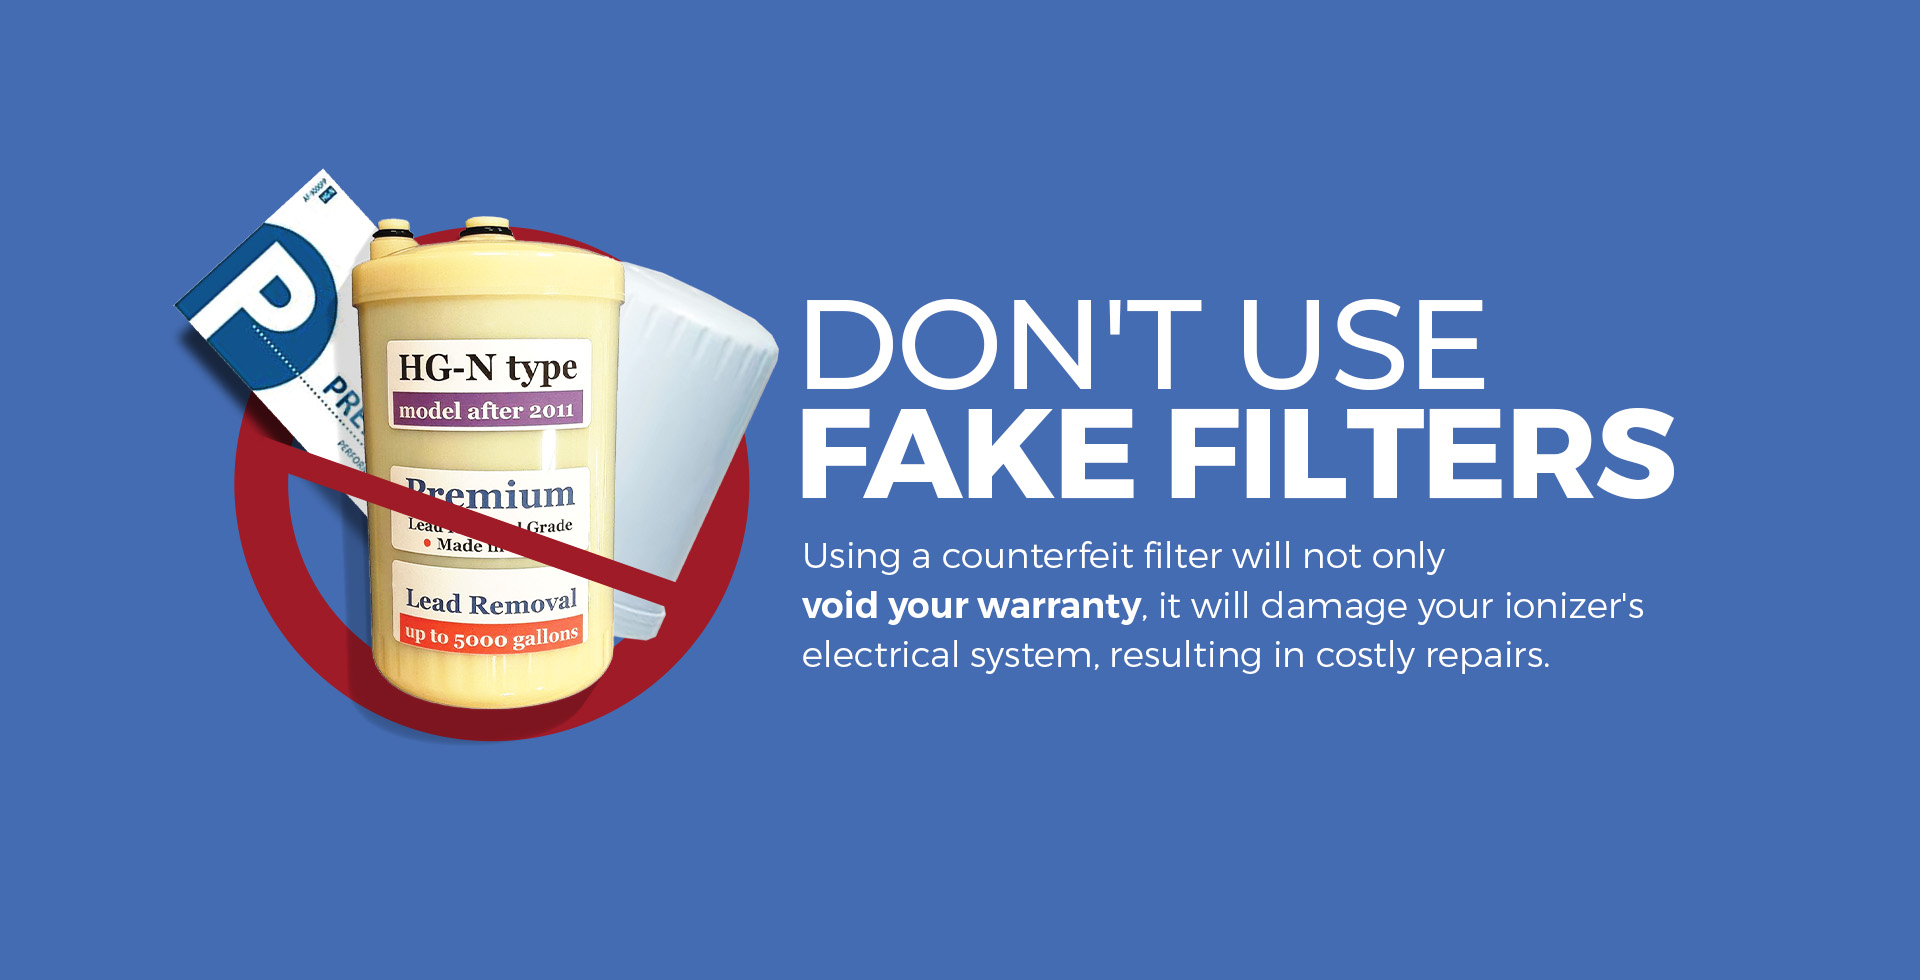 Don't use fake filters!